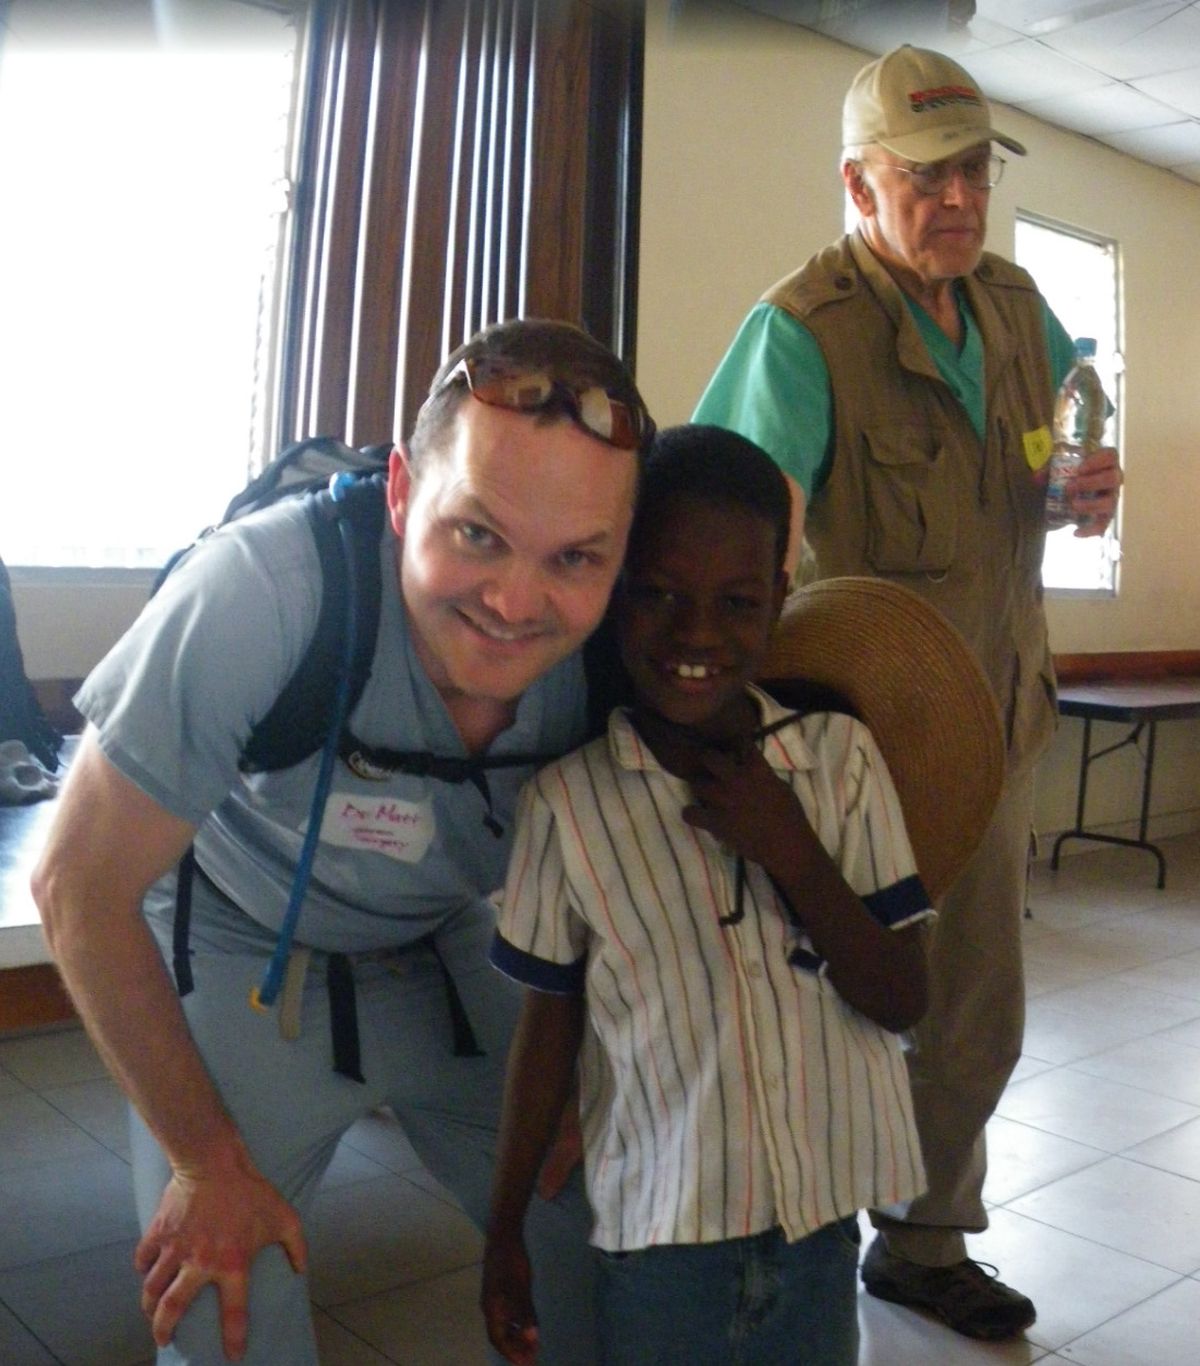 Rockwood Clinic and Sacred Heart surgeon Mathew Rawlins poses with a Haitian boy at a clinic in Port-au-Prince, the capital of the Caribbean nation devastated by an earthquake Jan. 12, 2010. Rawlins went on a weeklong humanitarian mission with the Church of Jesus Christ of Latter-day Saints to help the earthquake victims, performing surgeries surgeries and helping patients find proper care. (Courtesy of Mathew Rawlins)